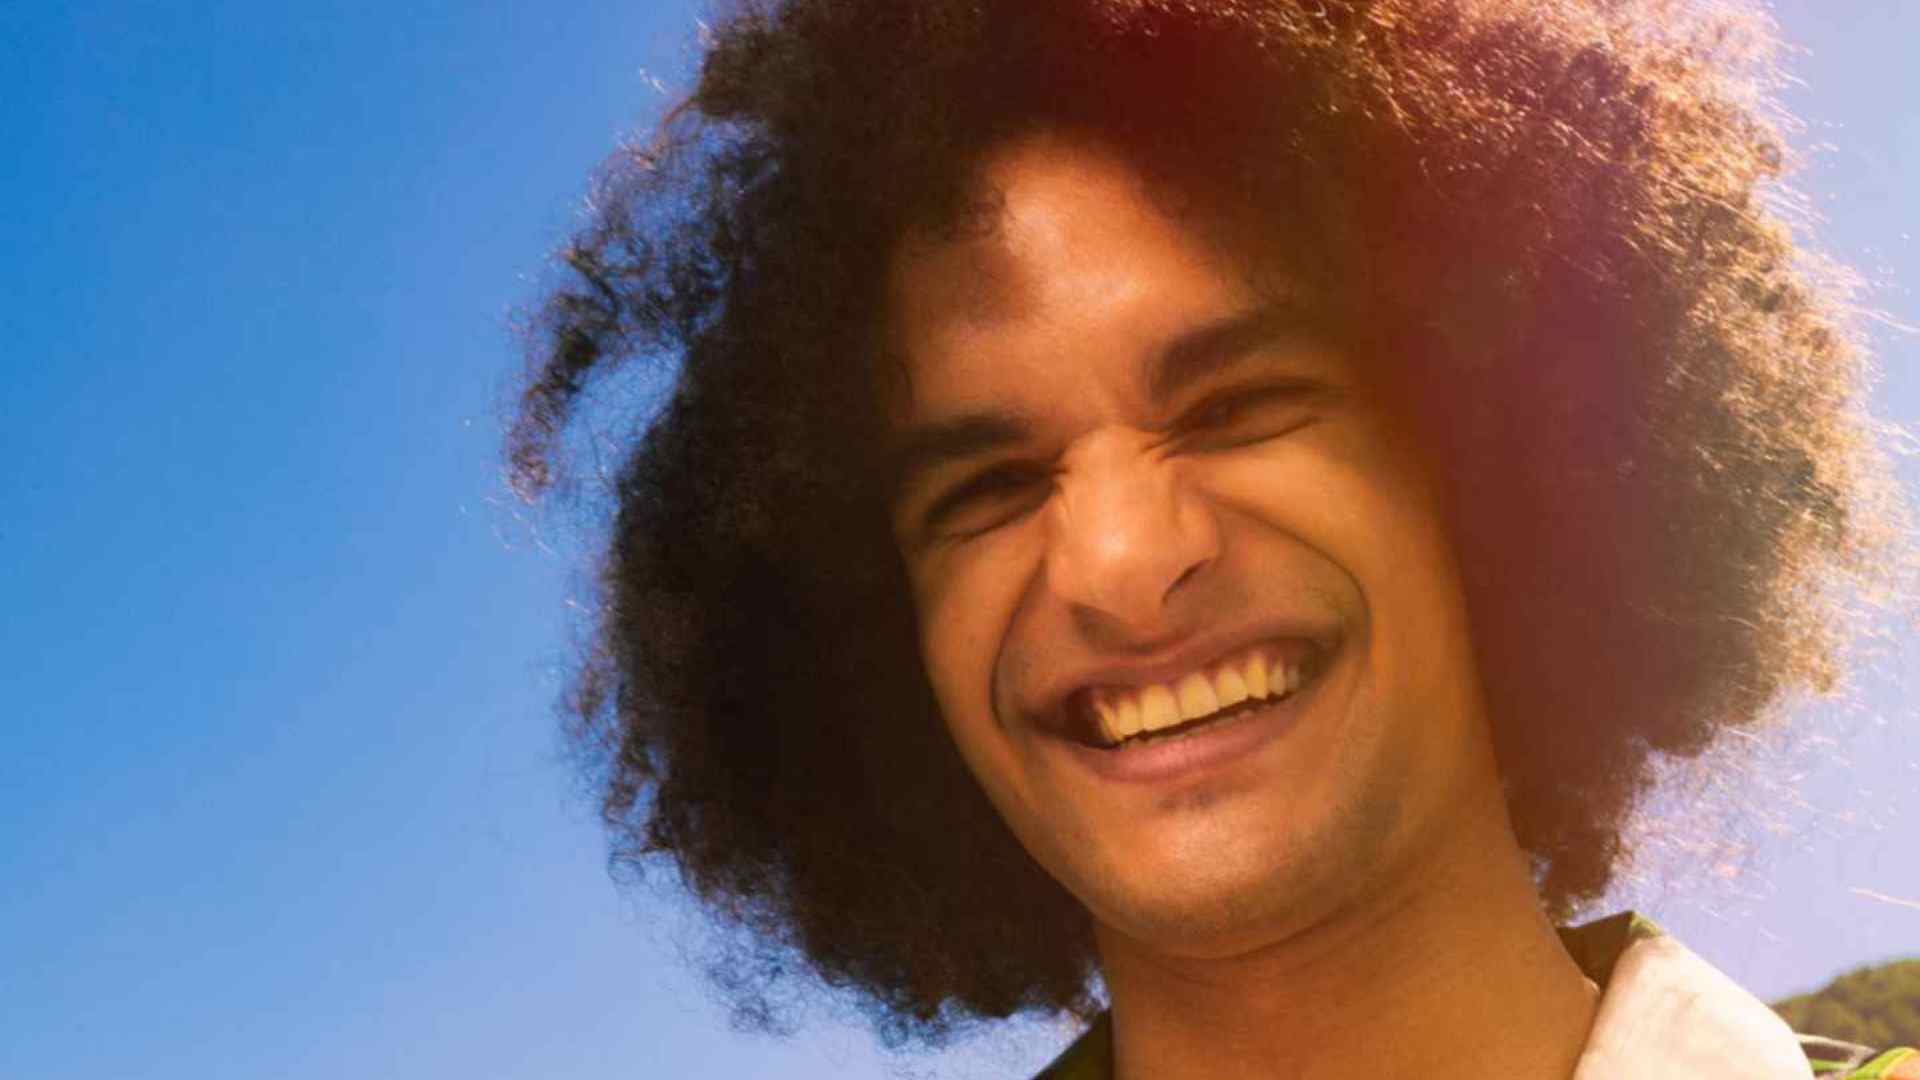 Man with curly hair smiling with blue sky in background